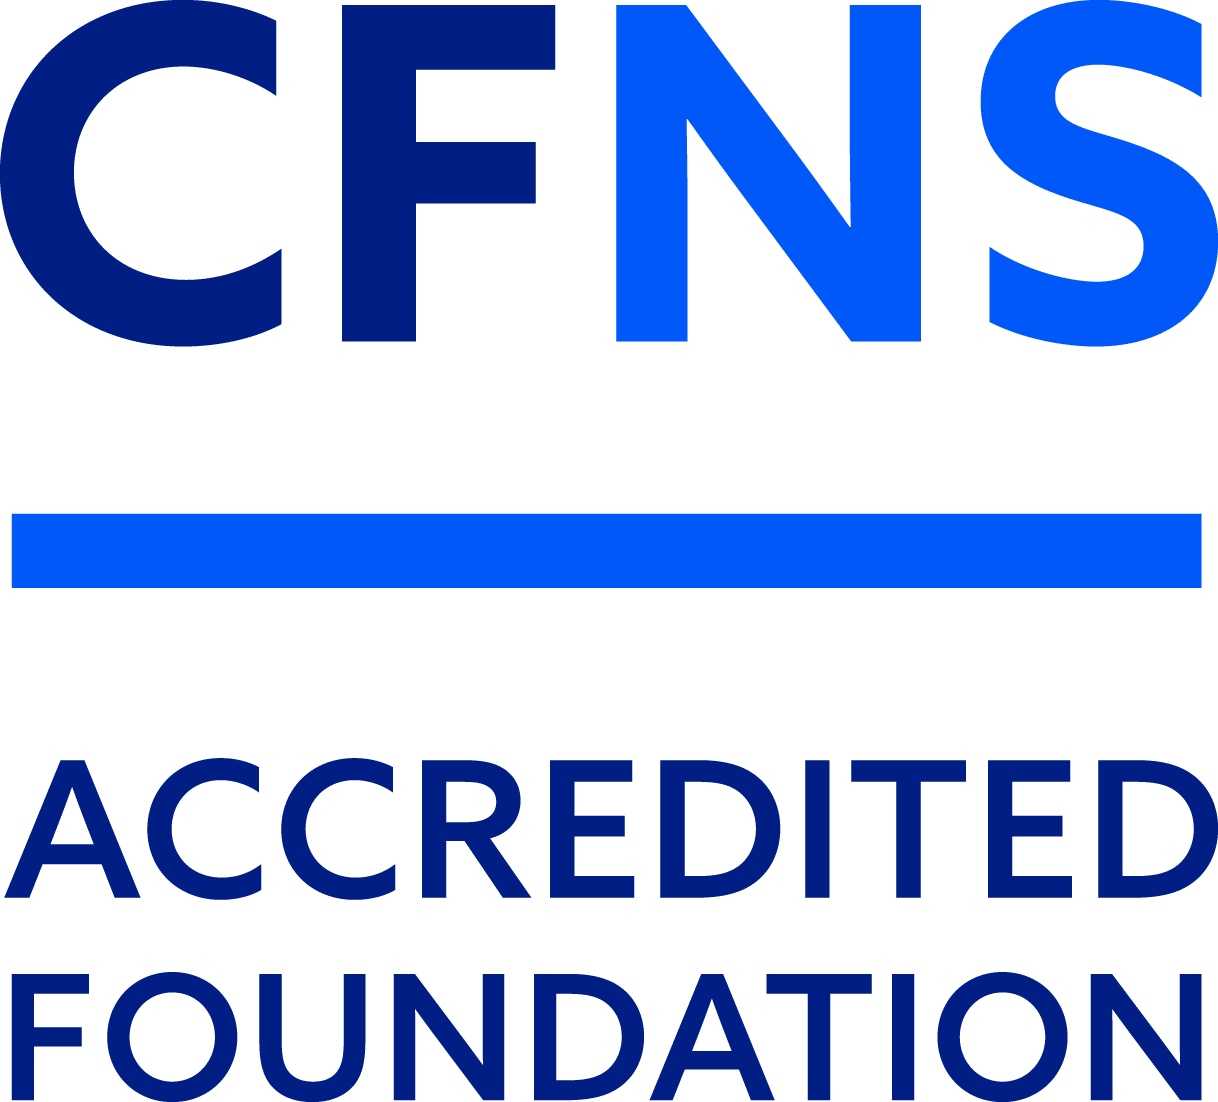 Council on Foundations National Standards accreditation logo